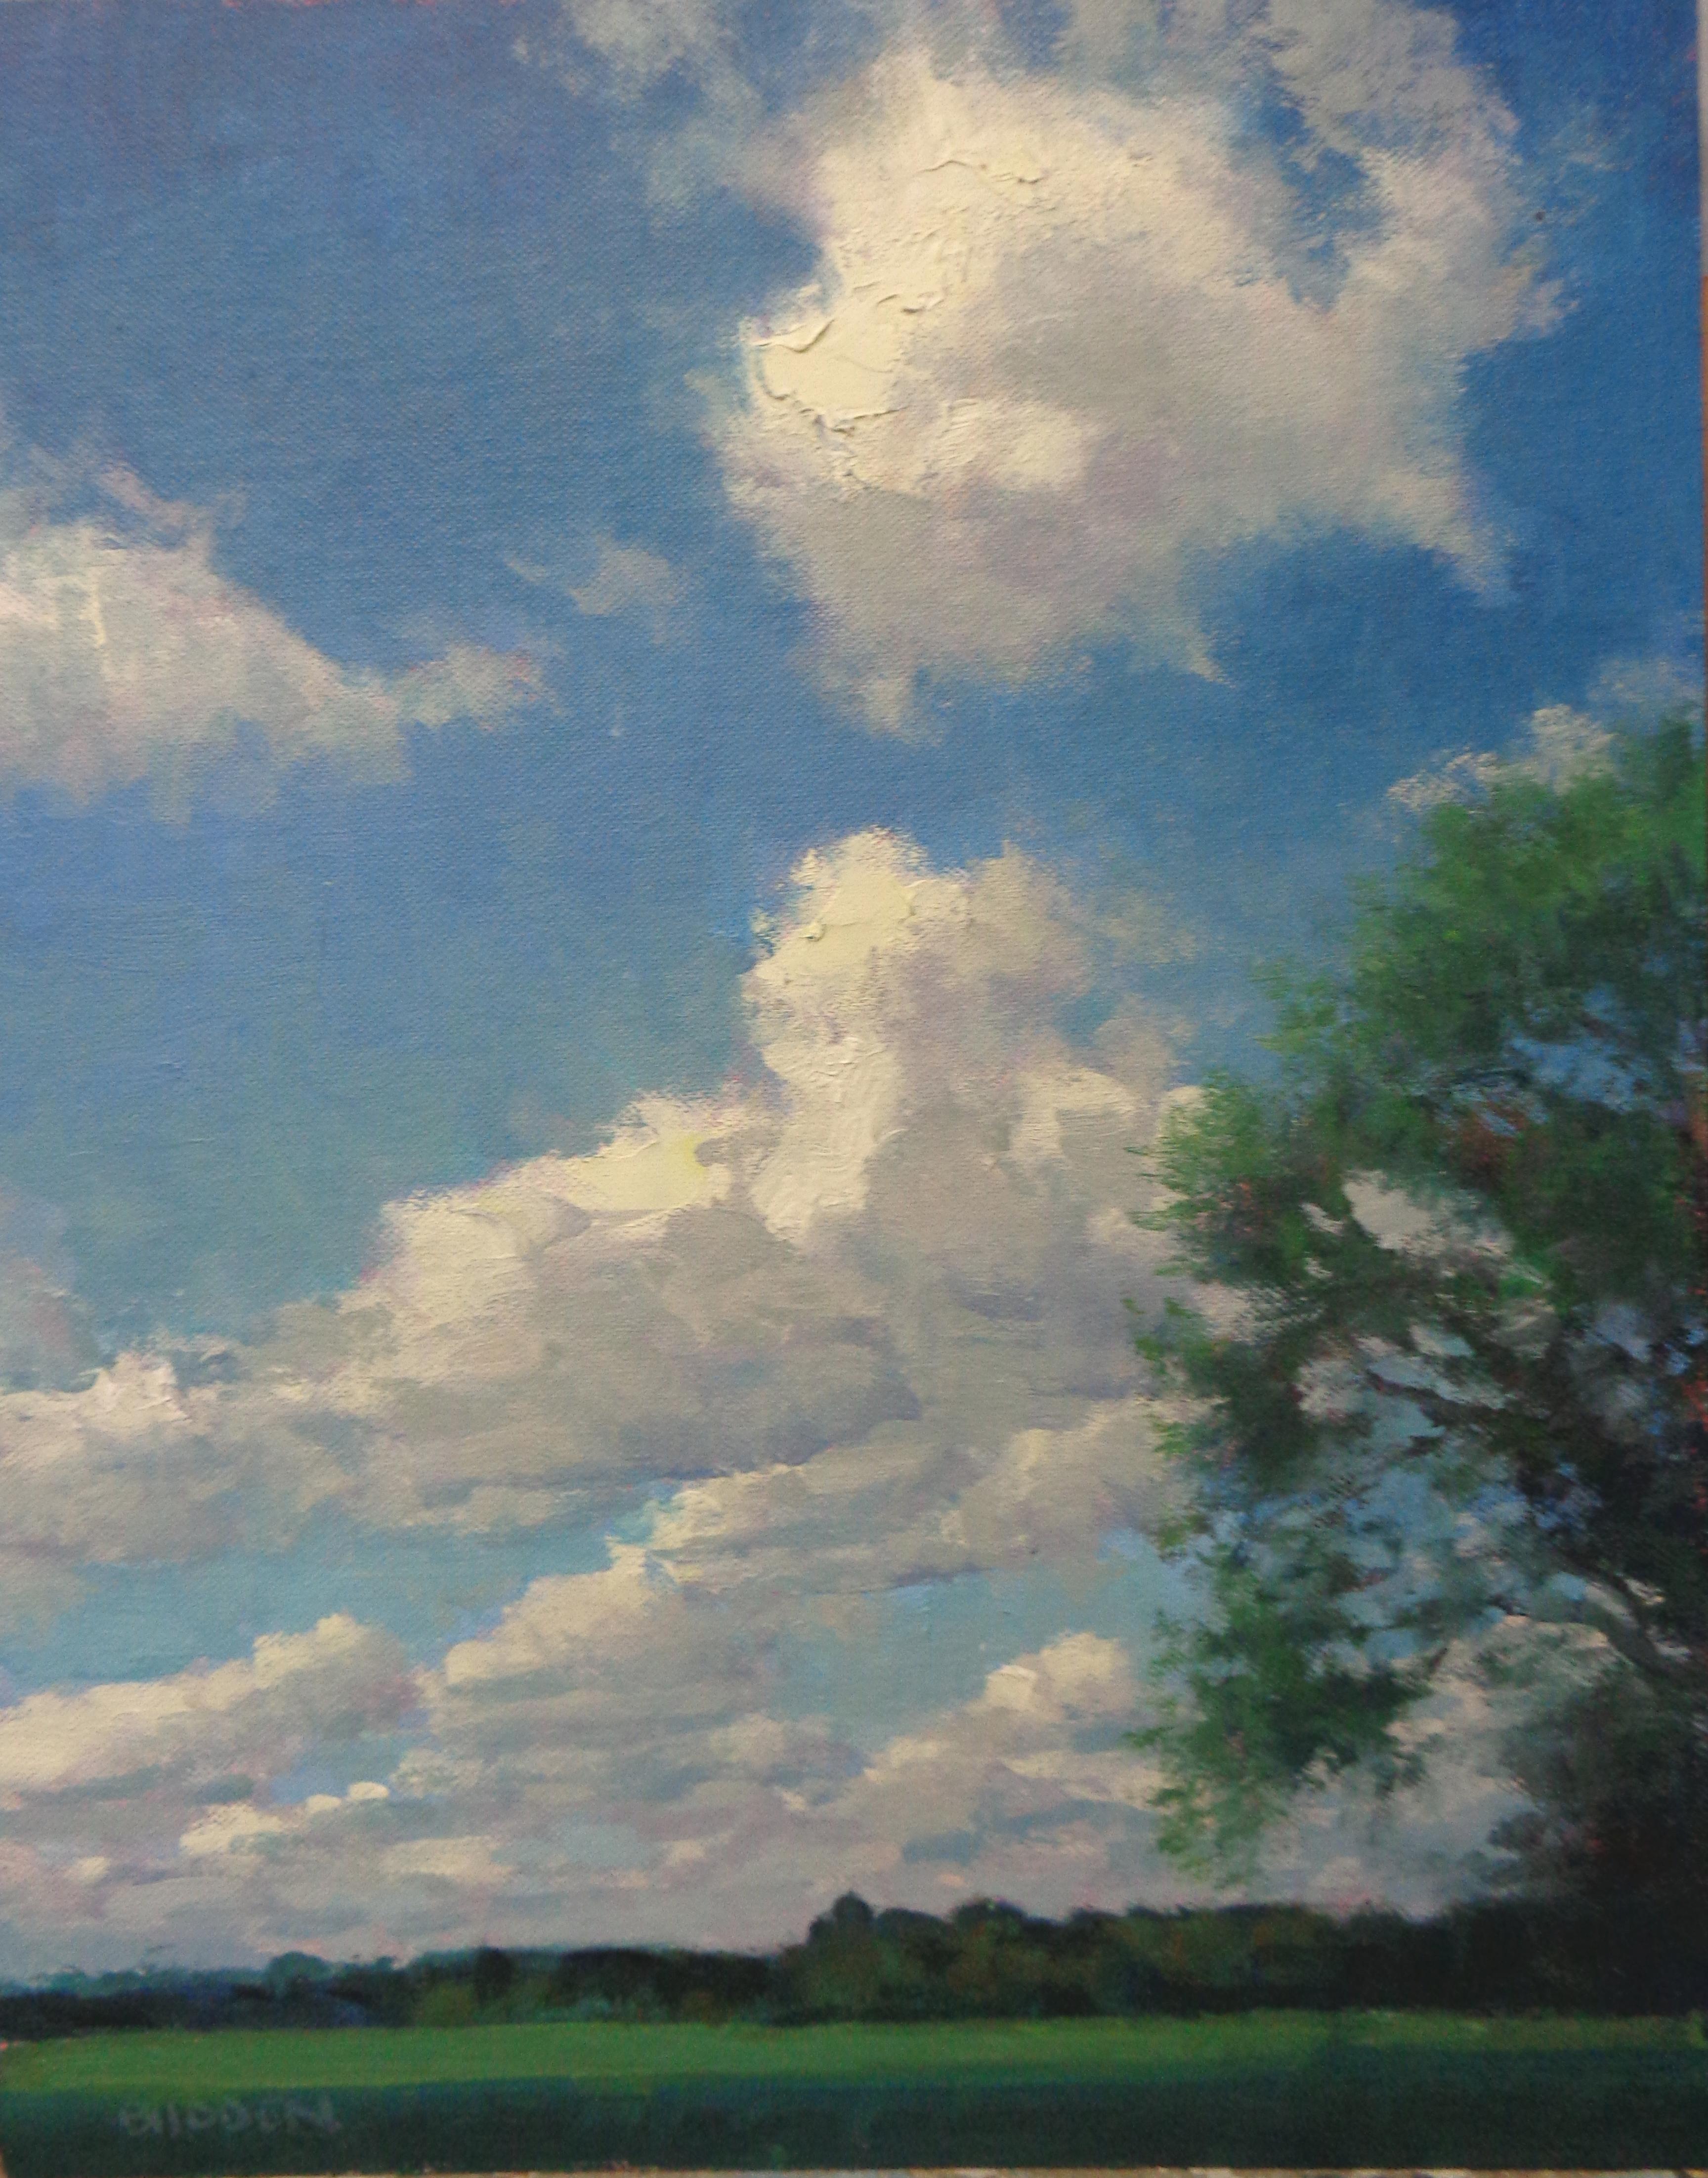 Impressionistic Landscape Oil Painting Summer Sky by Michael Budden  1